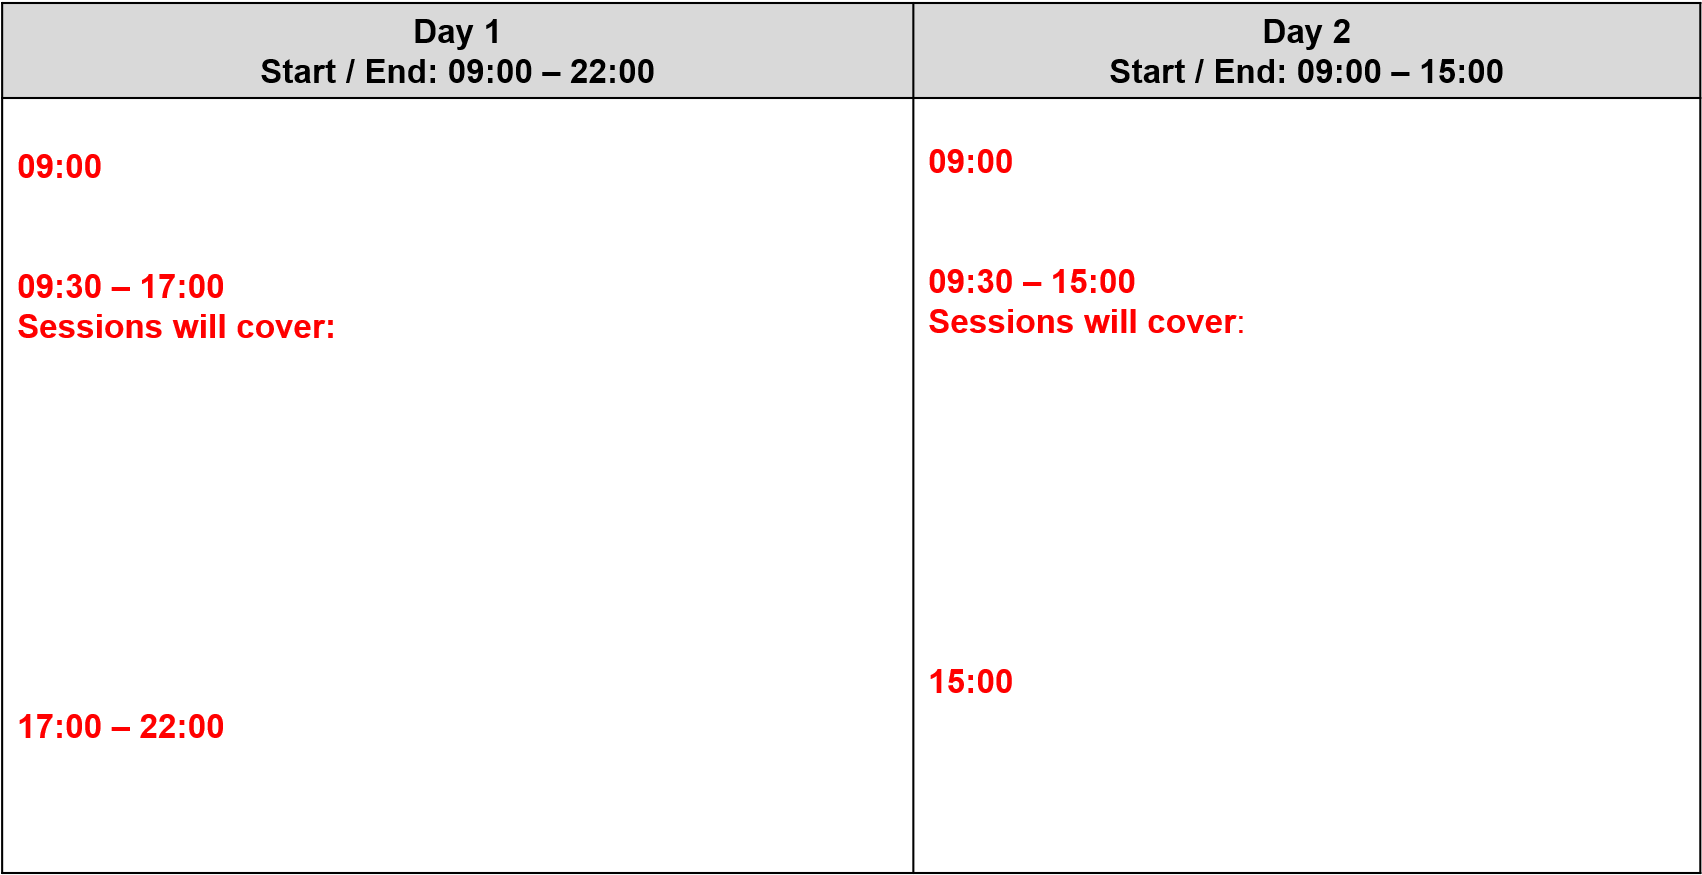 Two Day Event Agenda Schedule PNG